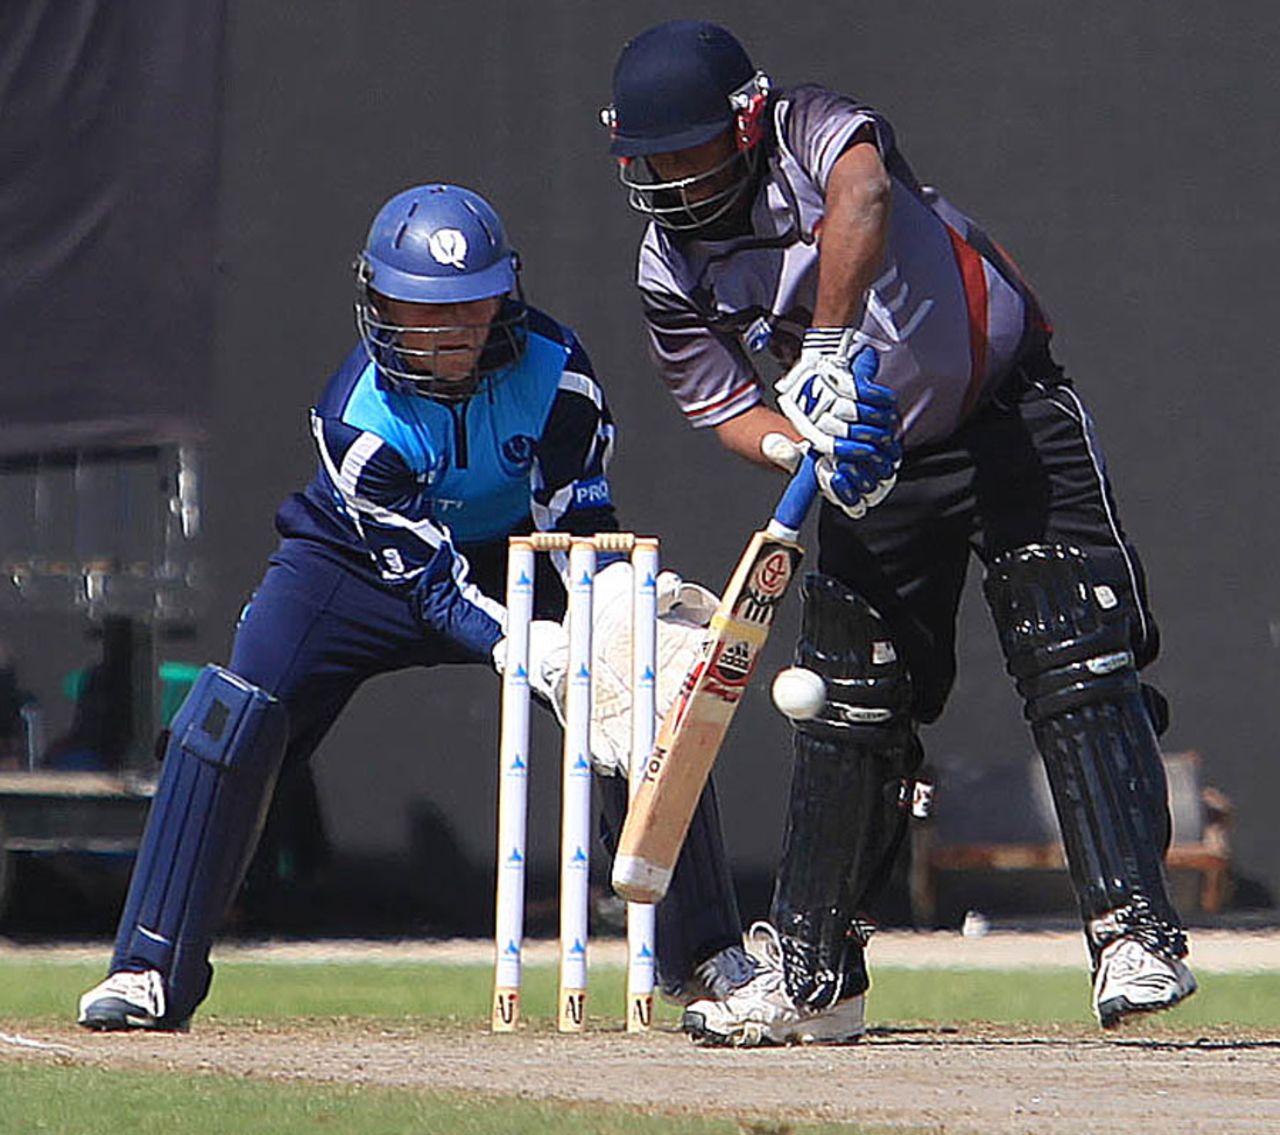 Swapnil Patil steered the UAE home with an unbeaten 55, UAE v Scotland, ICC World Cricket Championship, Sharjah, March, 7, 2012